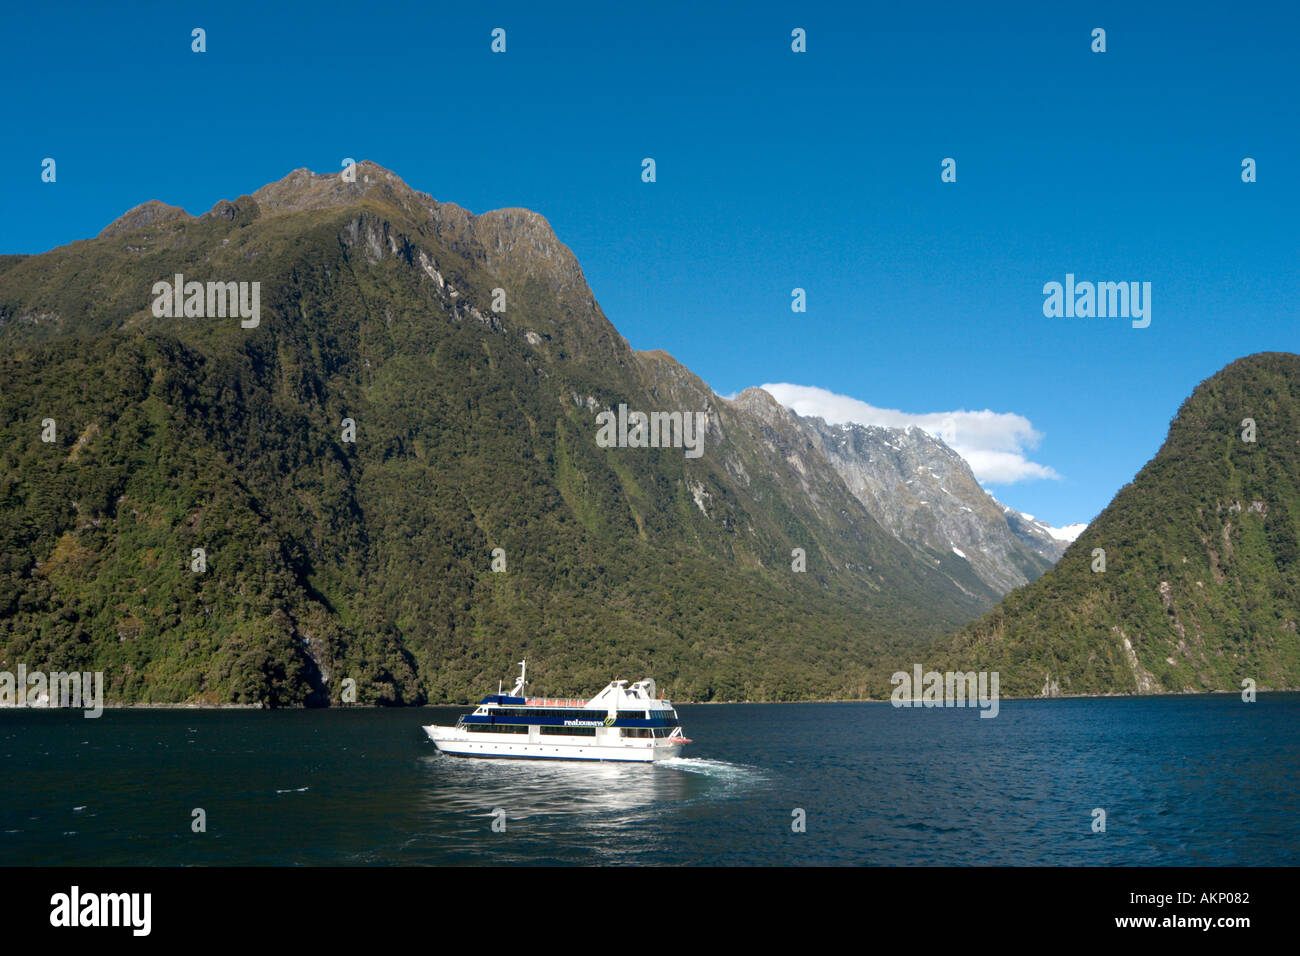 A cruise boat on Milford Sound, Fiordland National Park, South Island, New Zealand Stock Photo